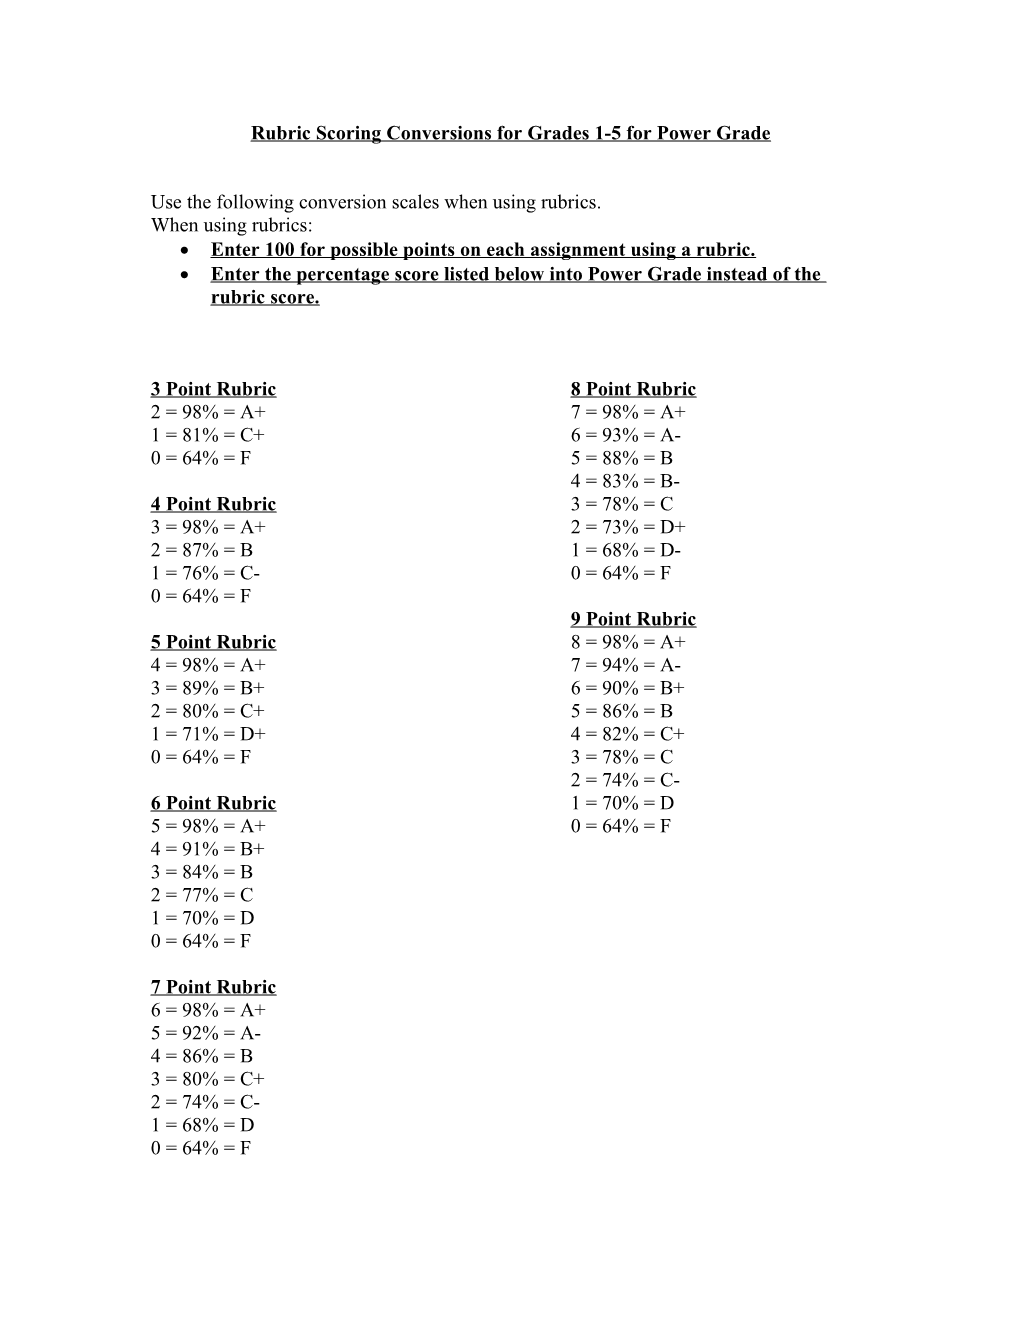 Rubric Scoring Conversions for Grades 1-5 for Power Grade